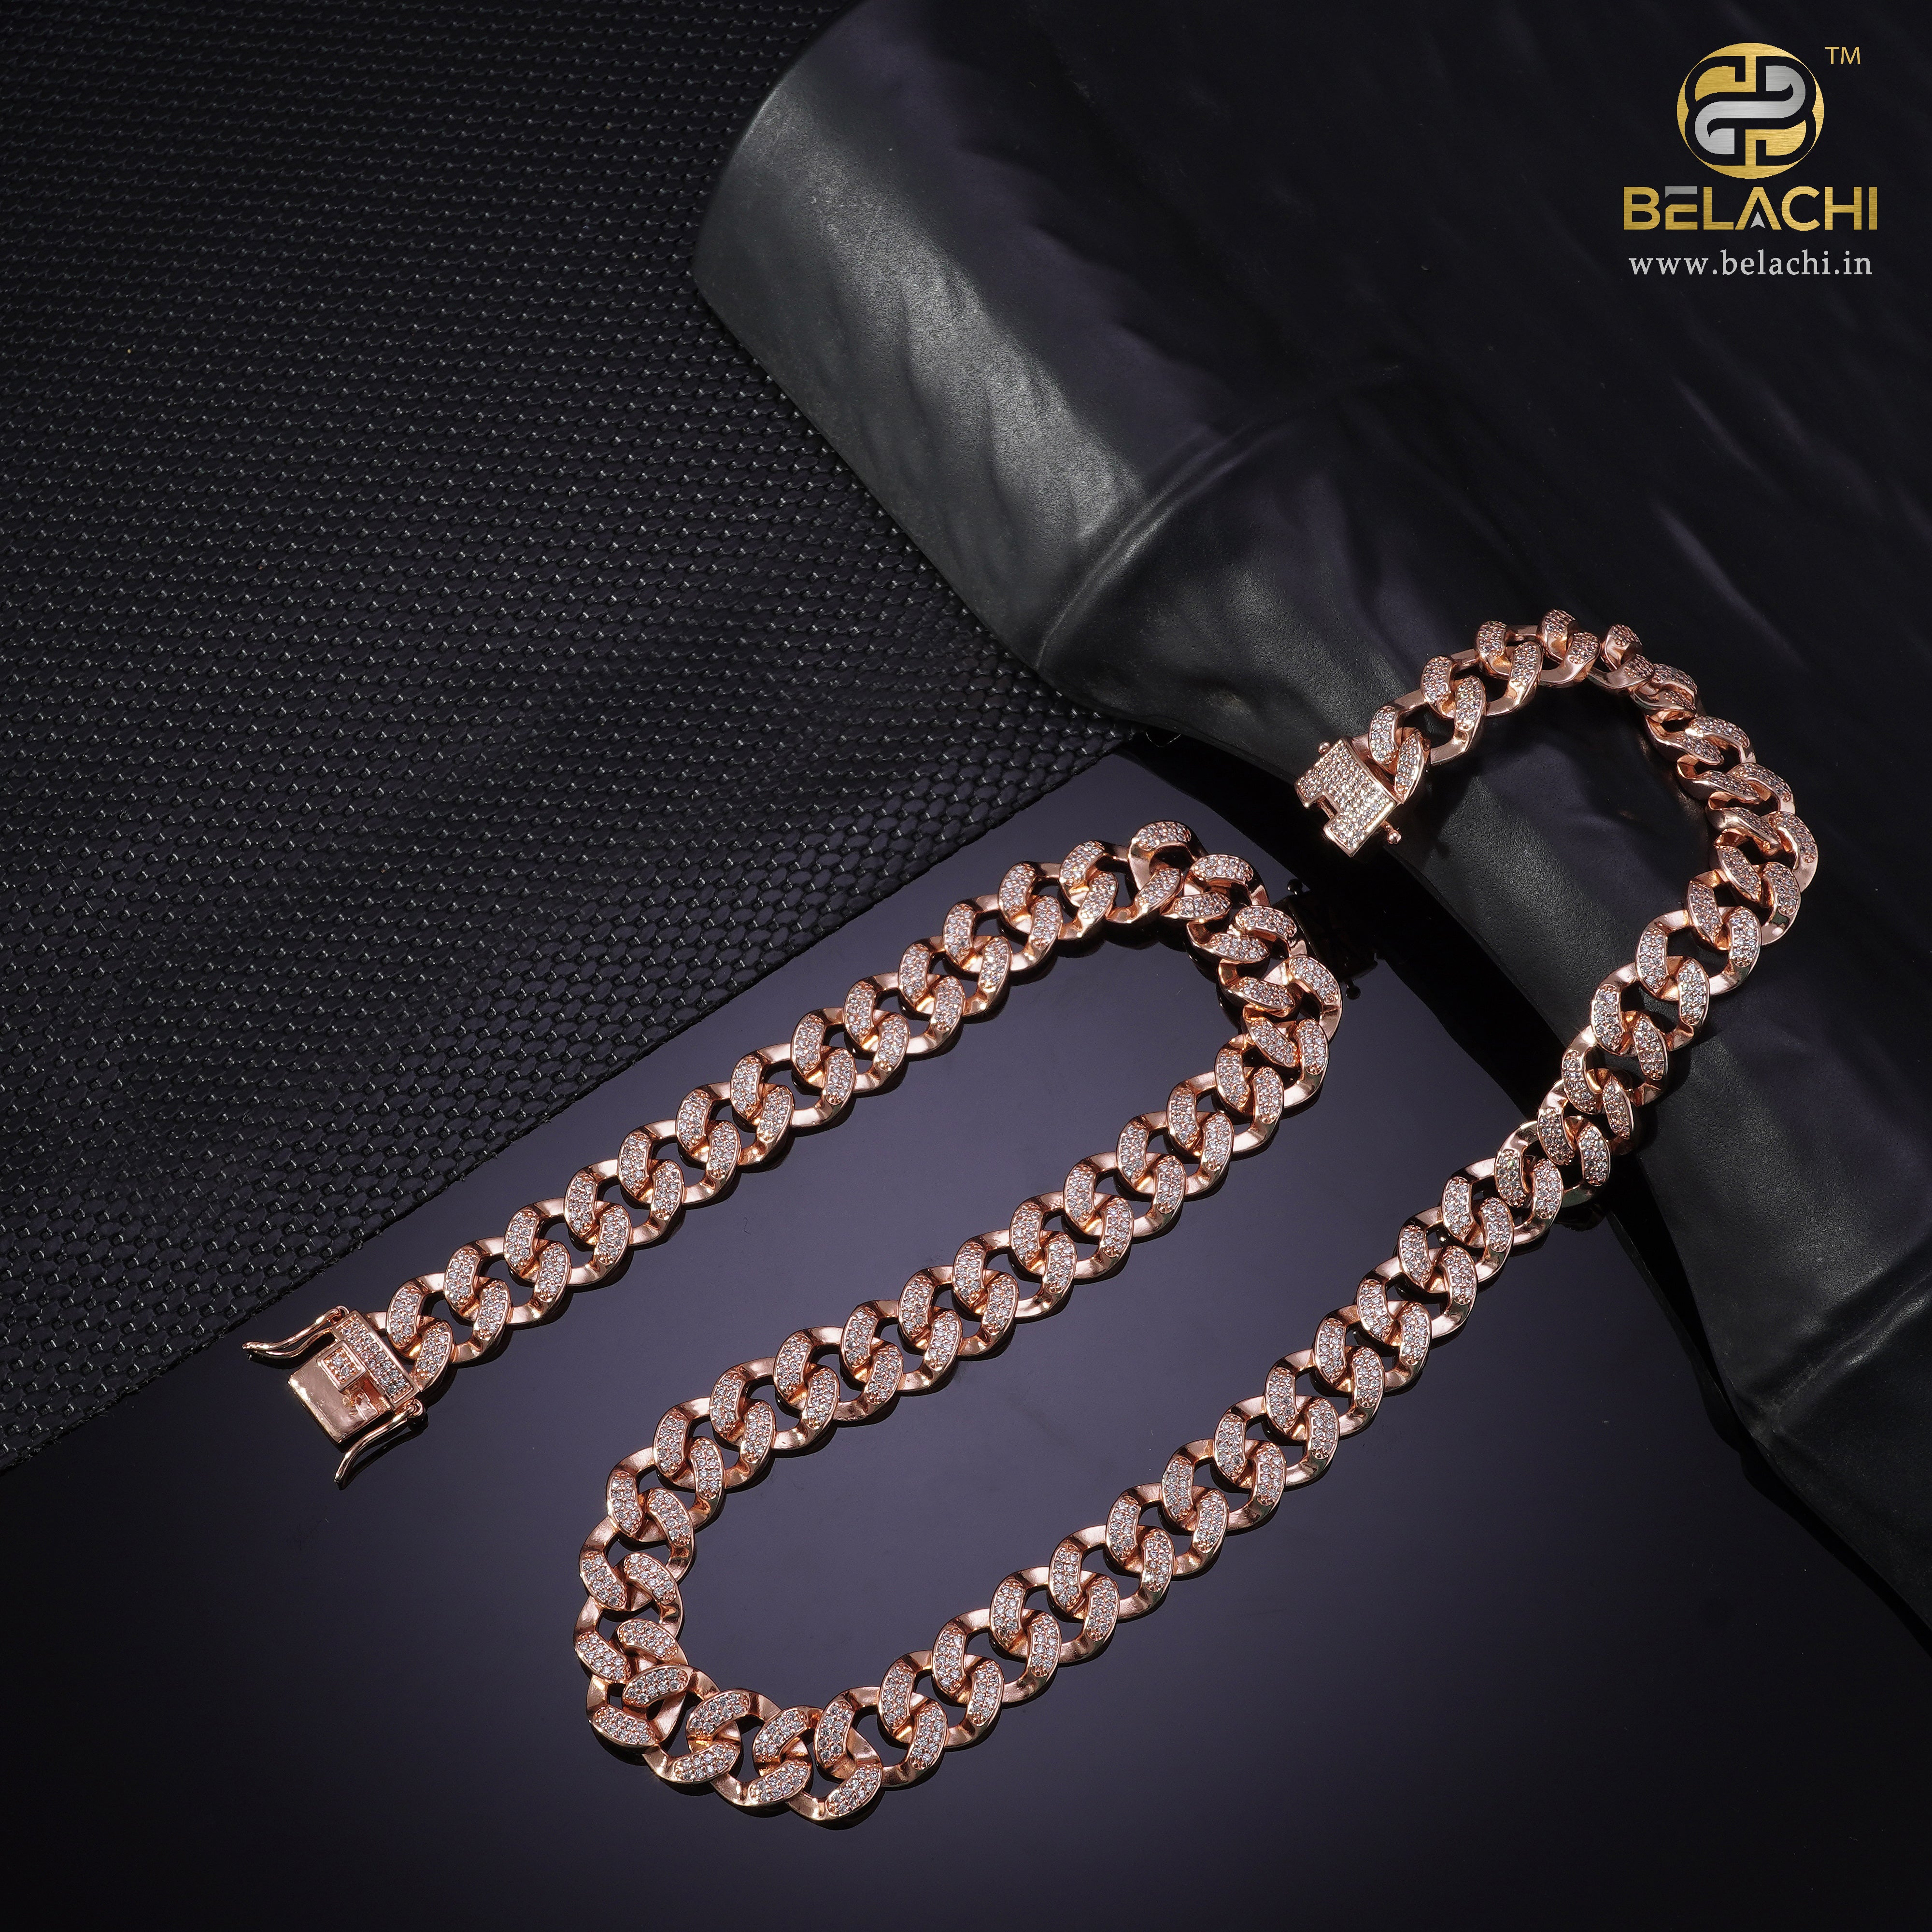 10K Rose Gold Solid Miami Cuban Link Chain 8mm Box Clasp Necklace 24-30  Inches - JFL Diamonds & Timepieces